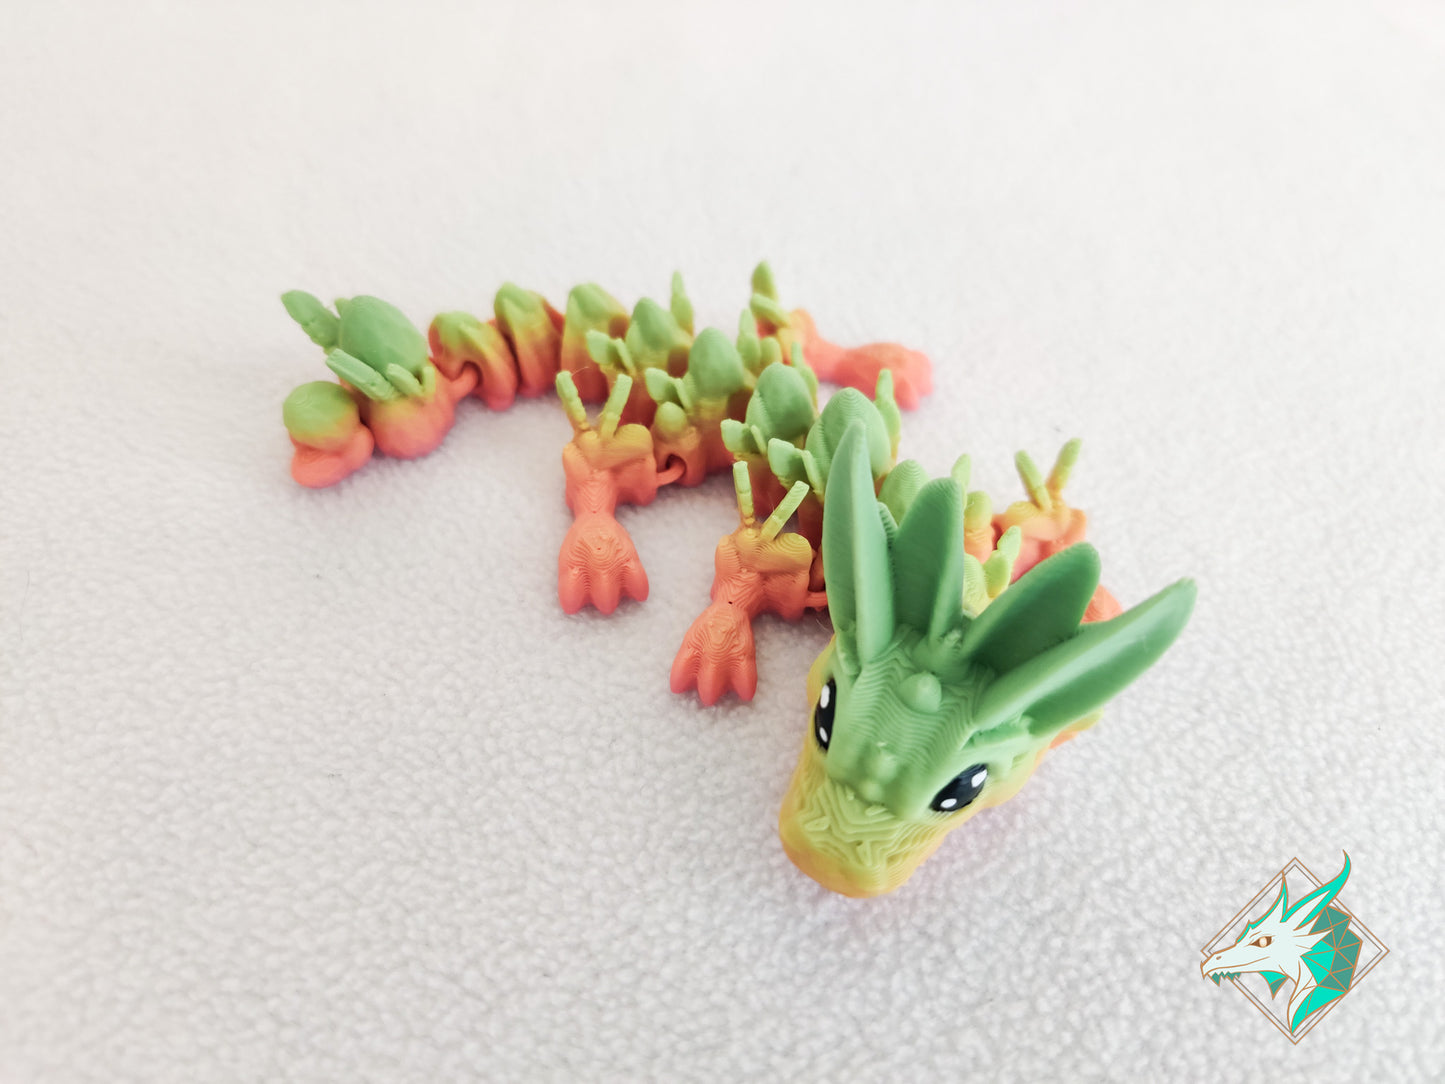 Baby Easter Dragon - Pocket Size